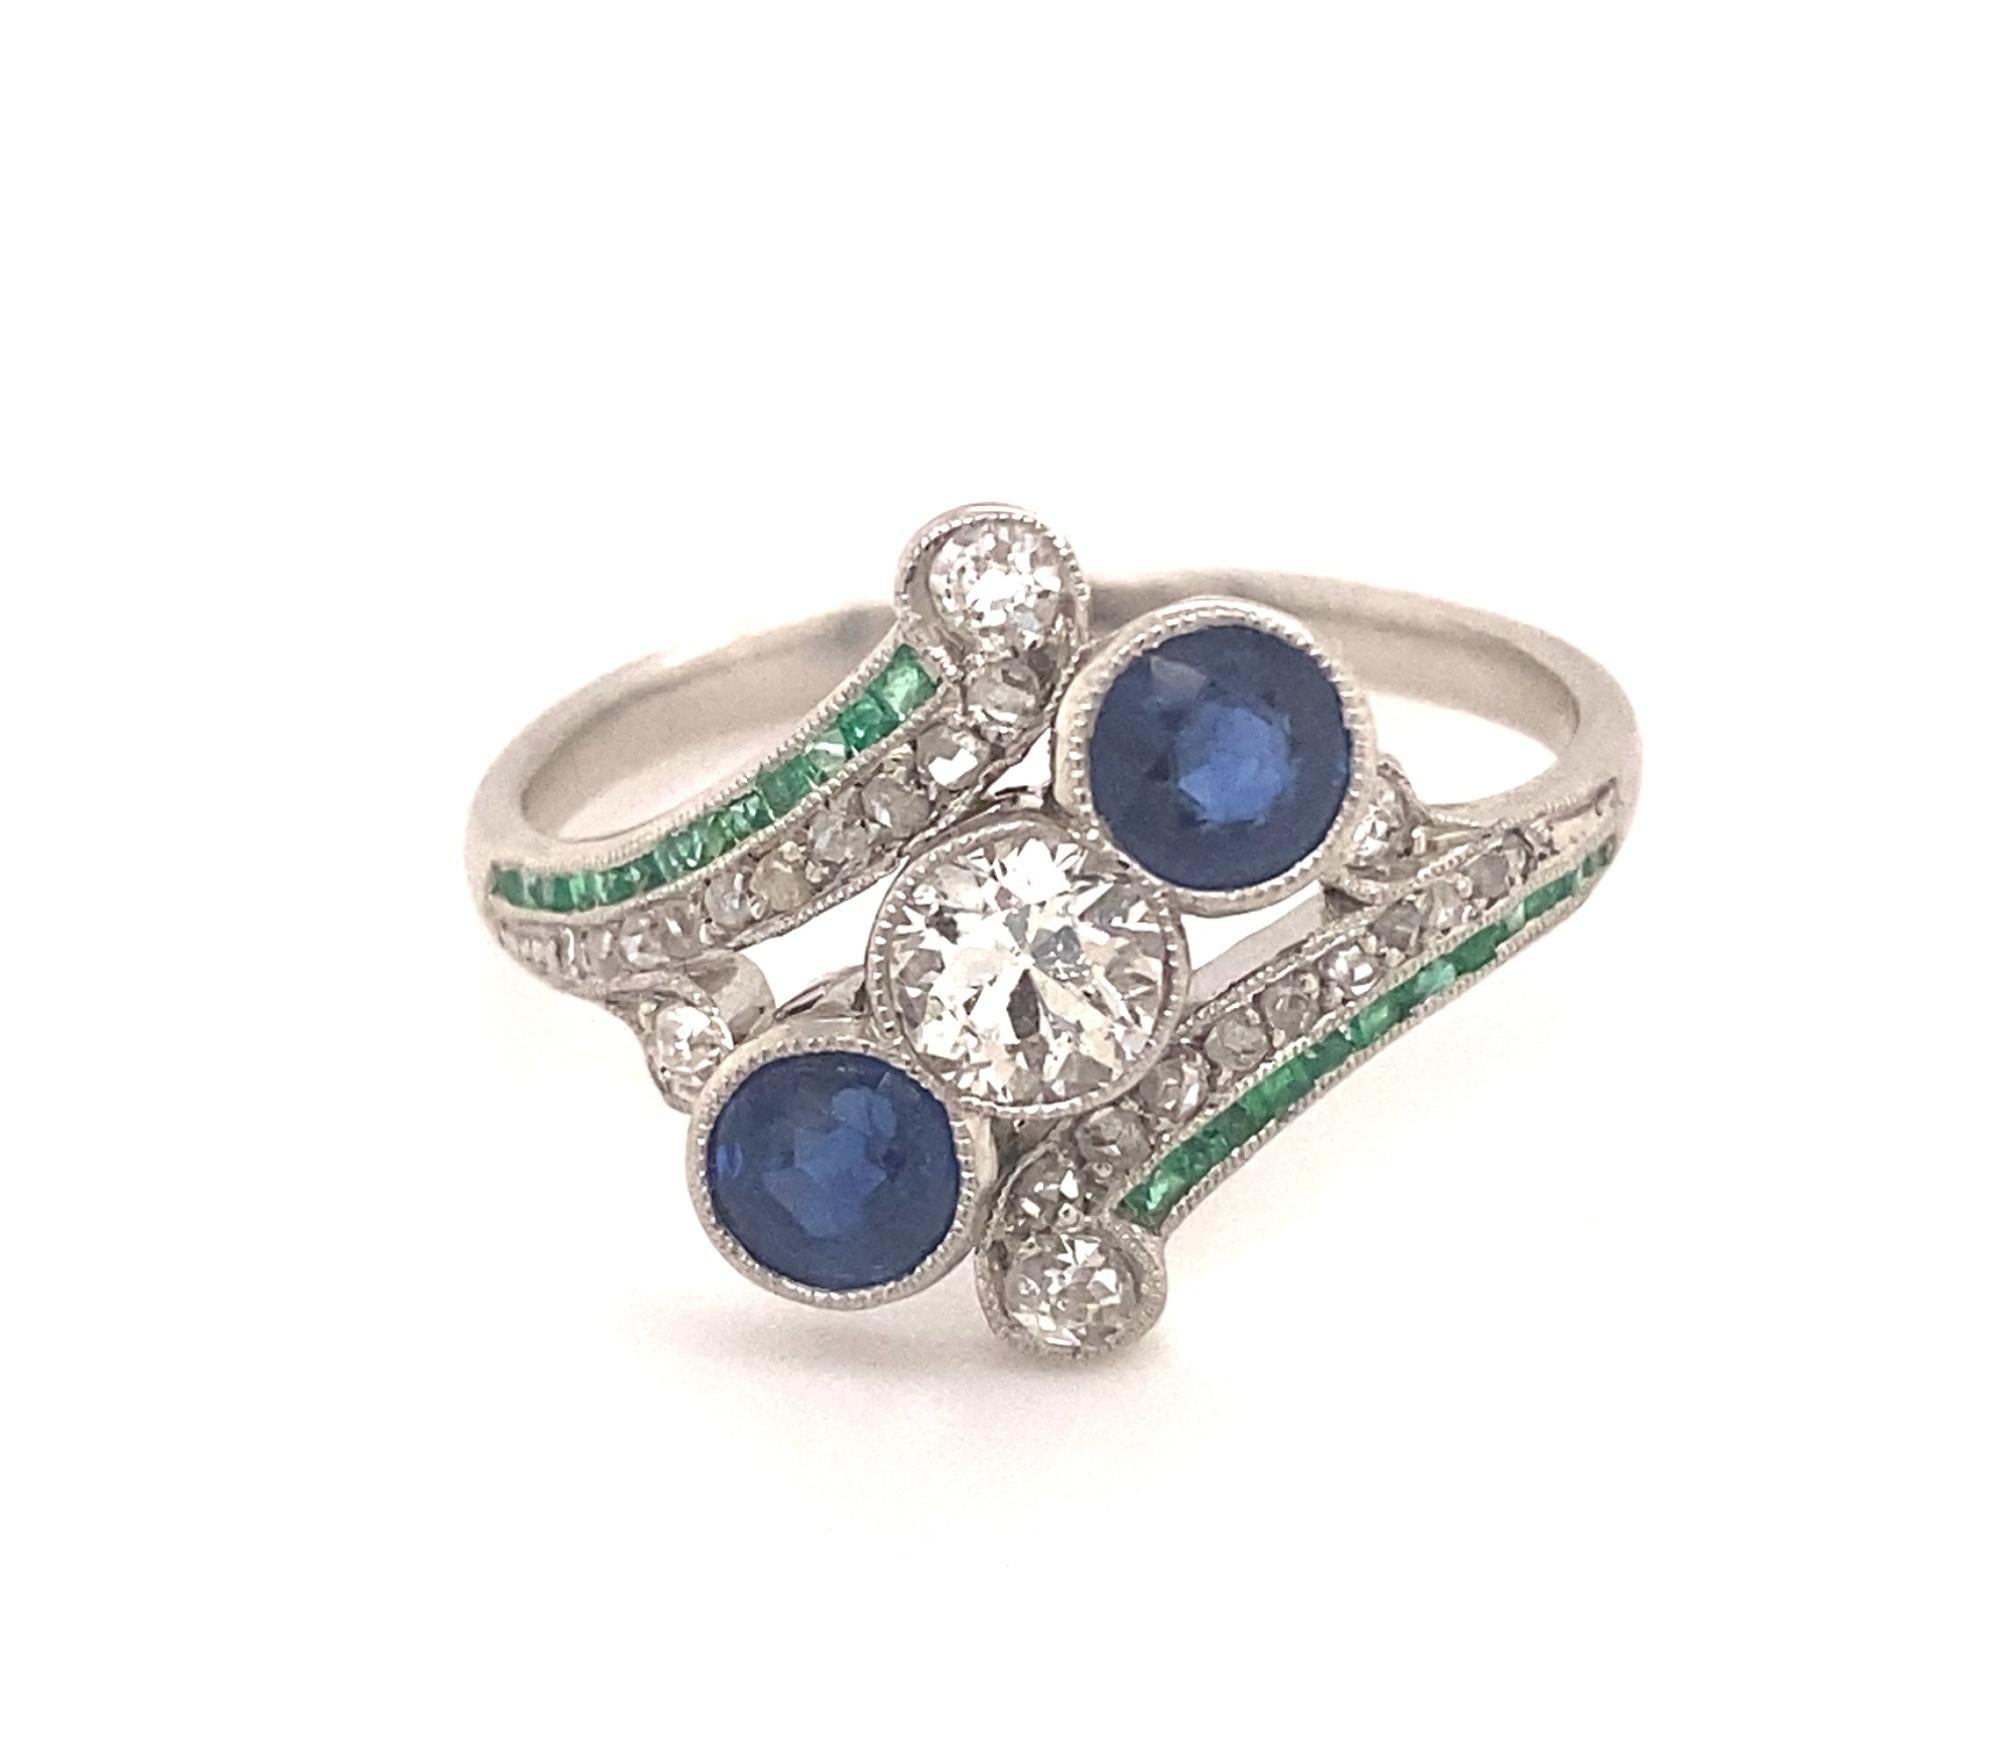 This is a beautiful original art deco ring c.1940's set in platinum. The ring is set with a European cut diamond, two round sapphires, rose cut diamonds and emeralds. The center diamonds measures .40 carats I color SI-1 clarity, the two round